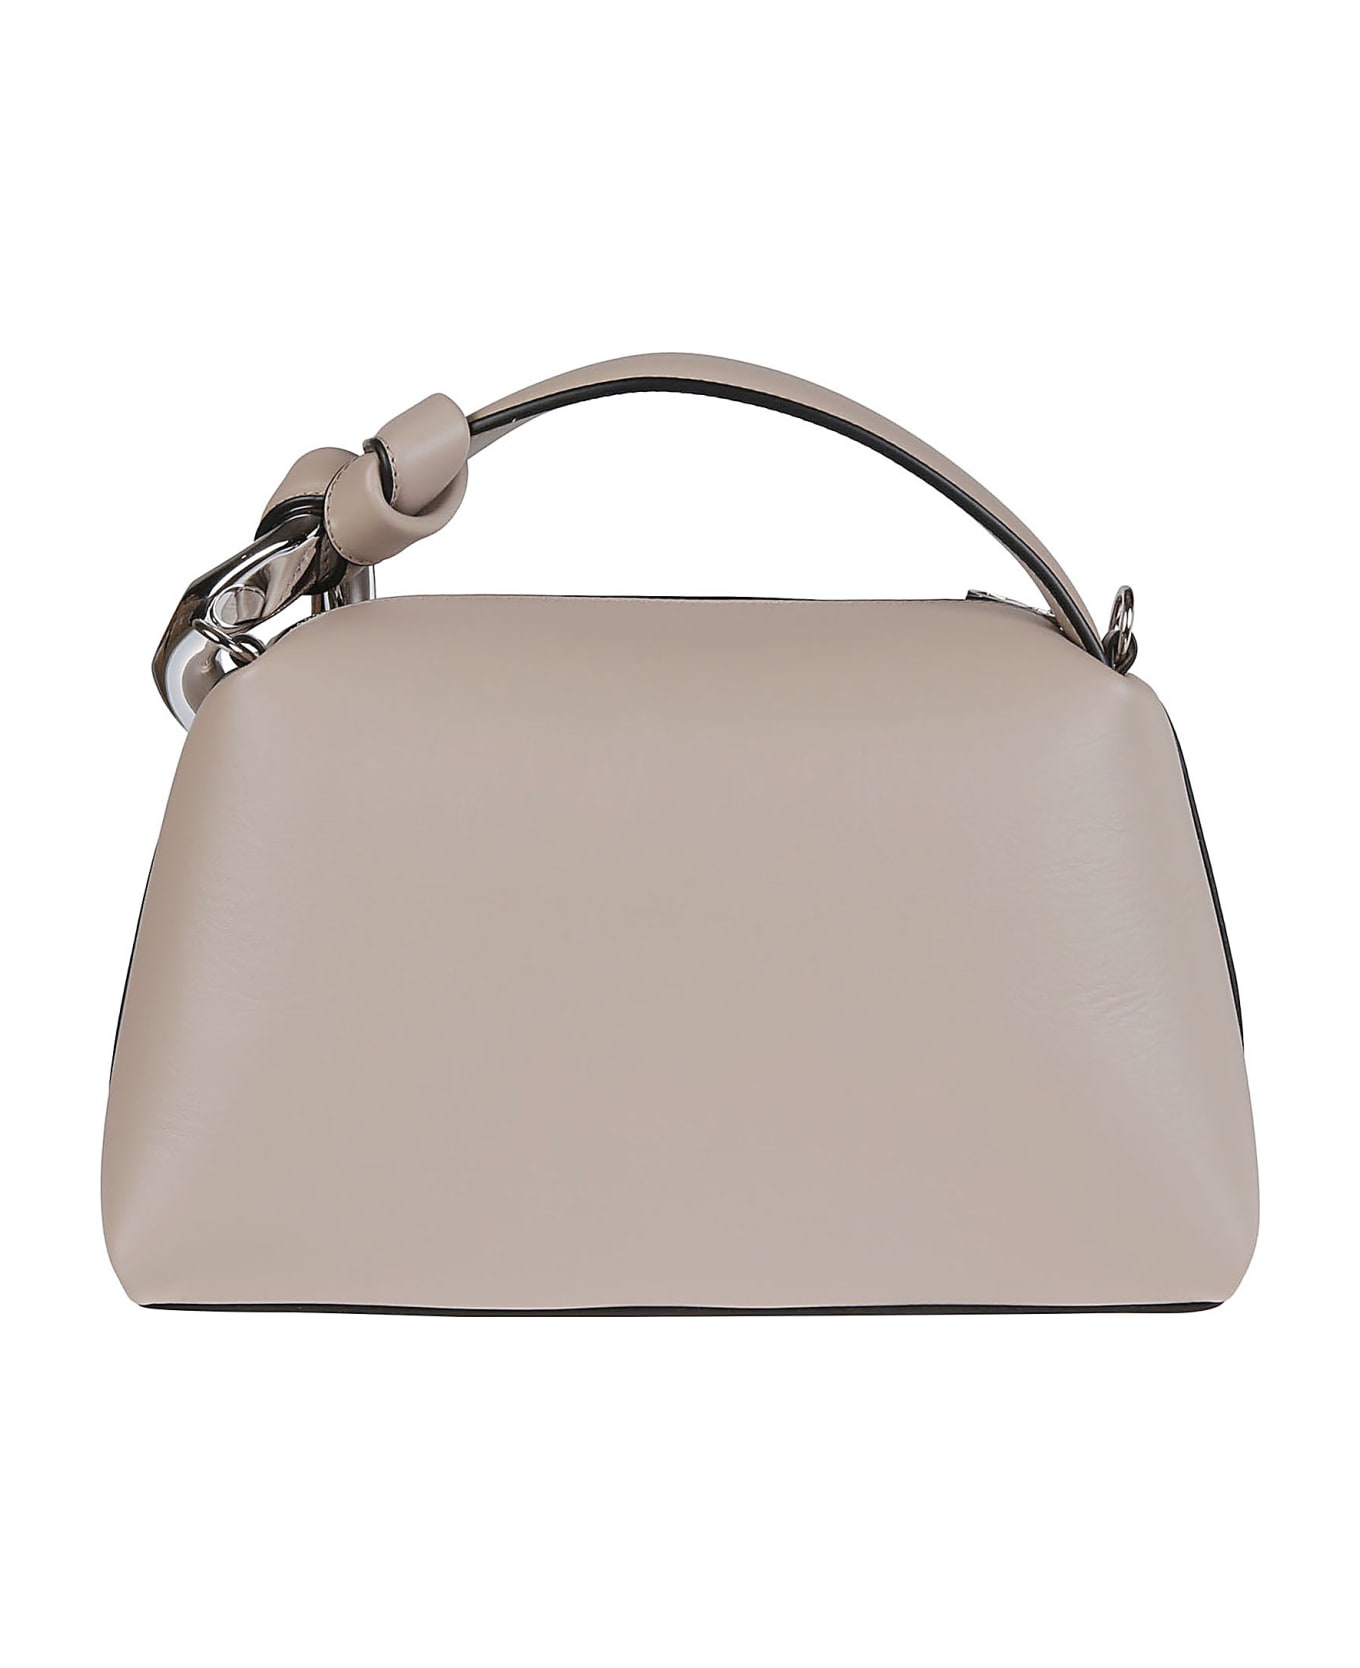 J.W. Anderson The Corner Bag - Taupe